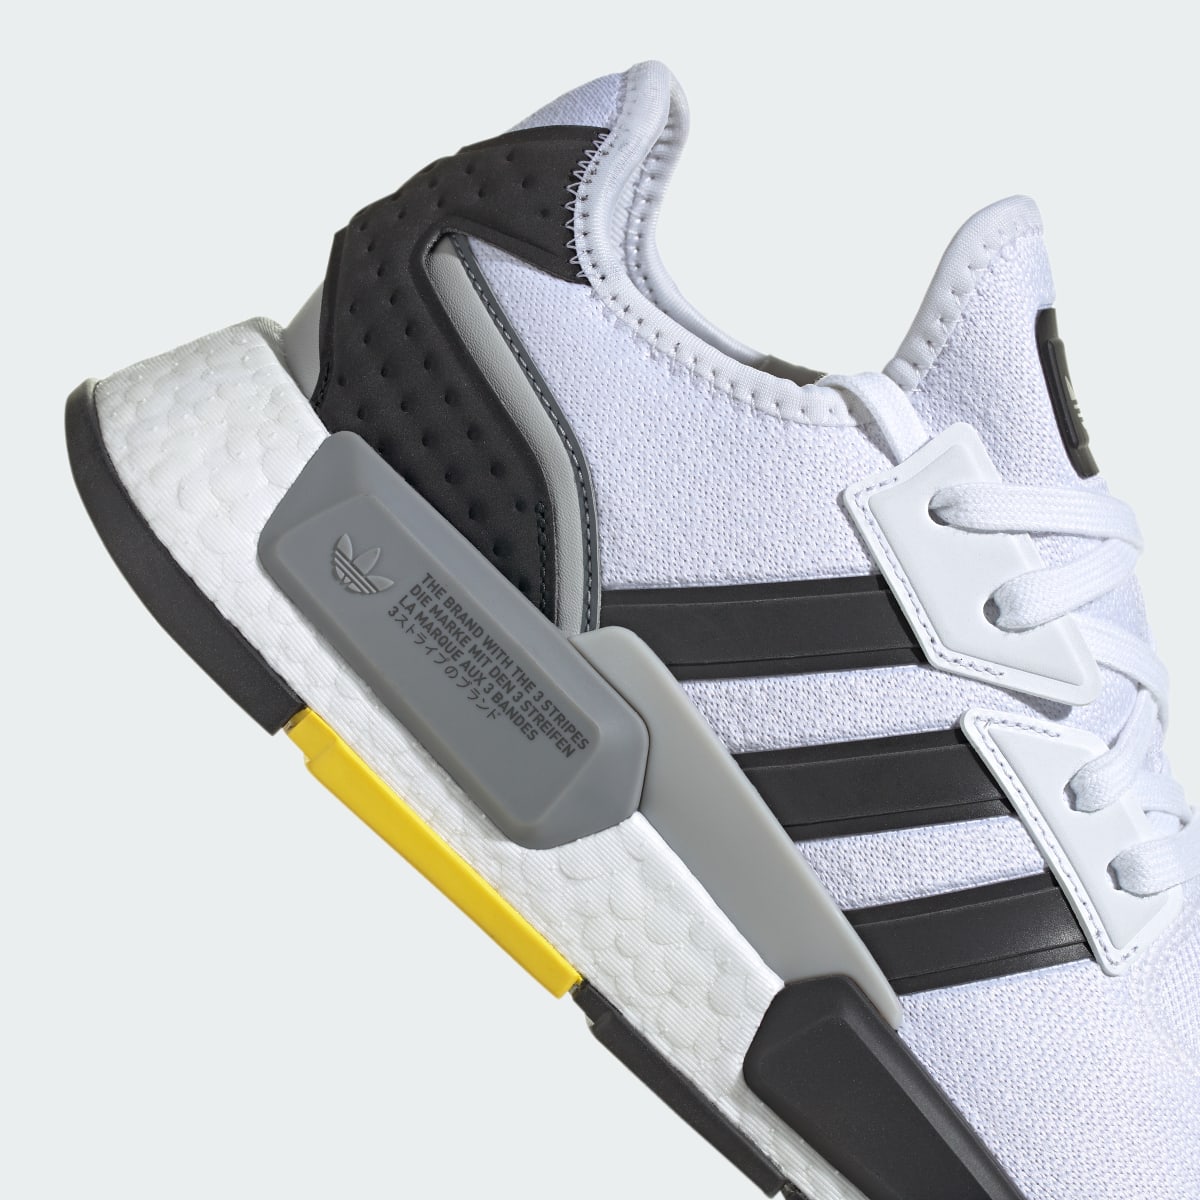 Adidas NMD_G1 Shoes. 6